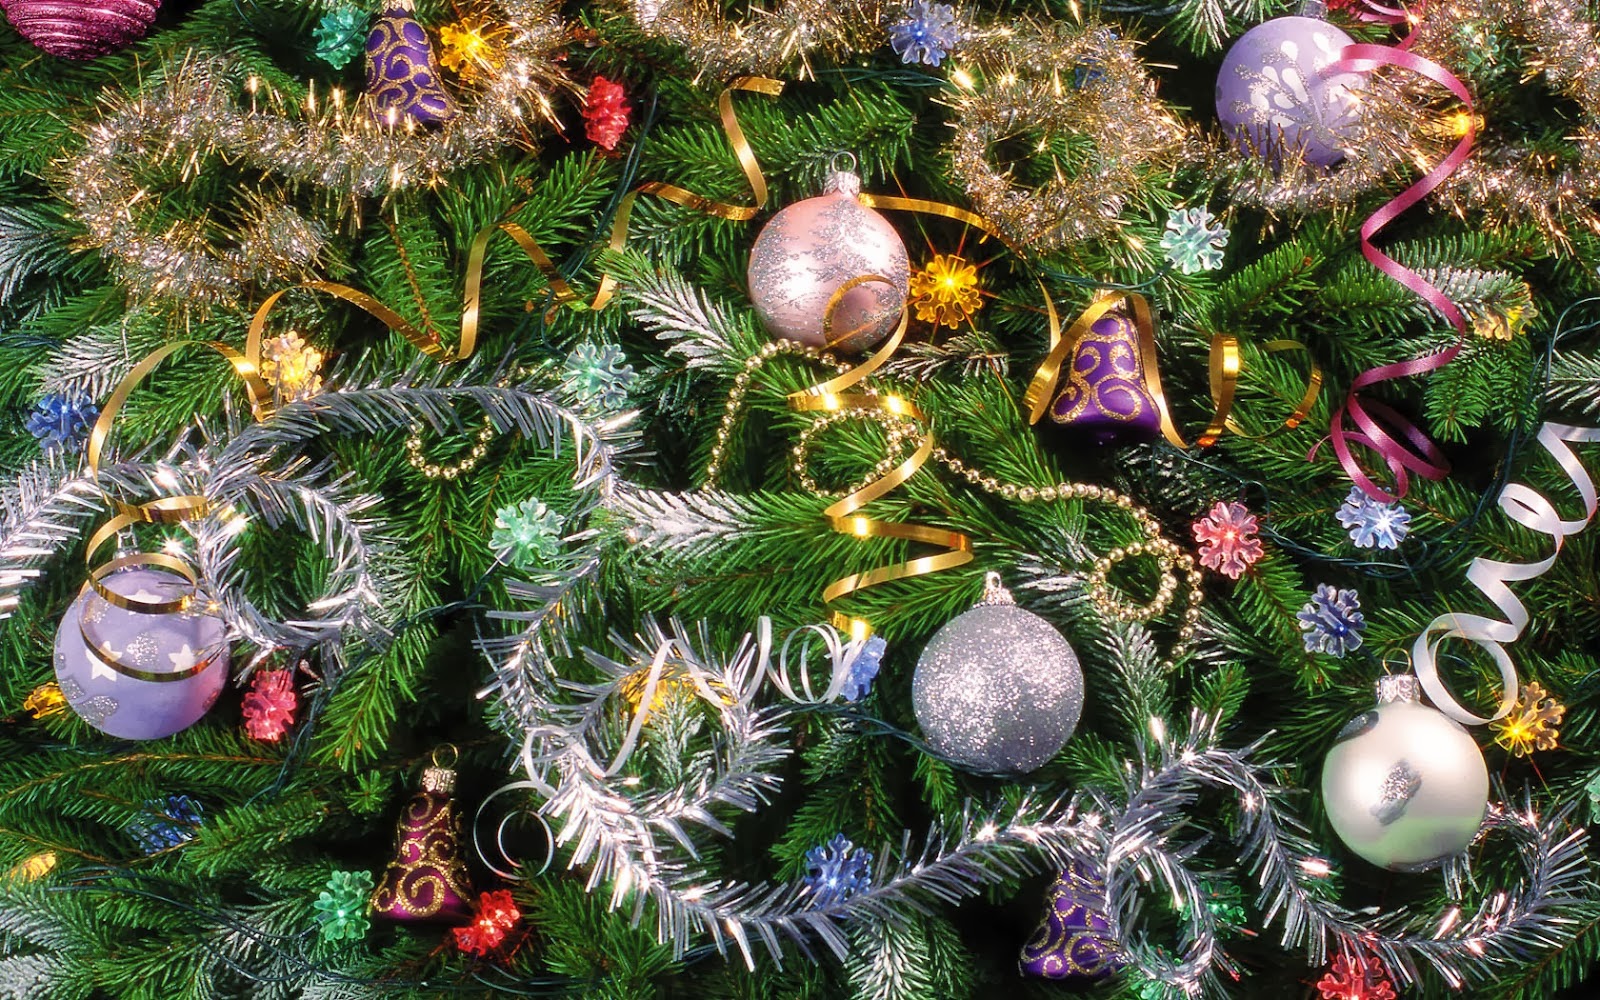 Delightful Christmas Ornaments and Decorations